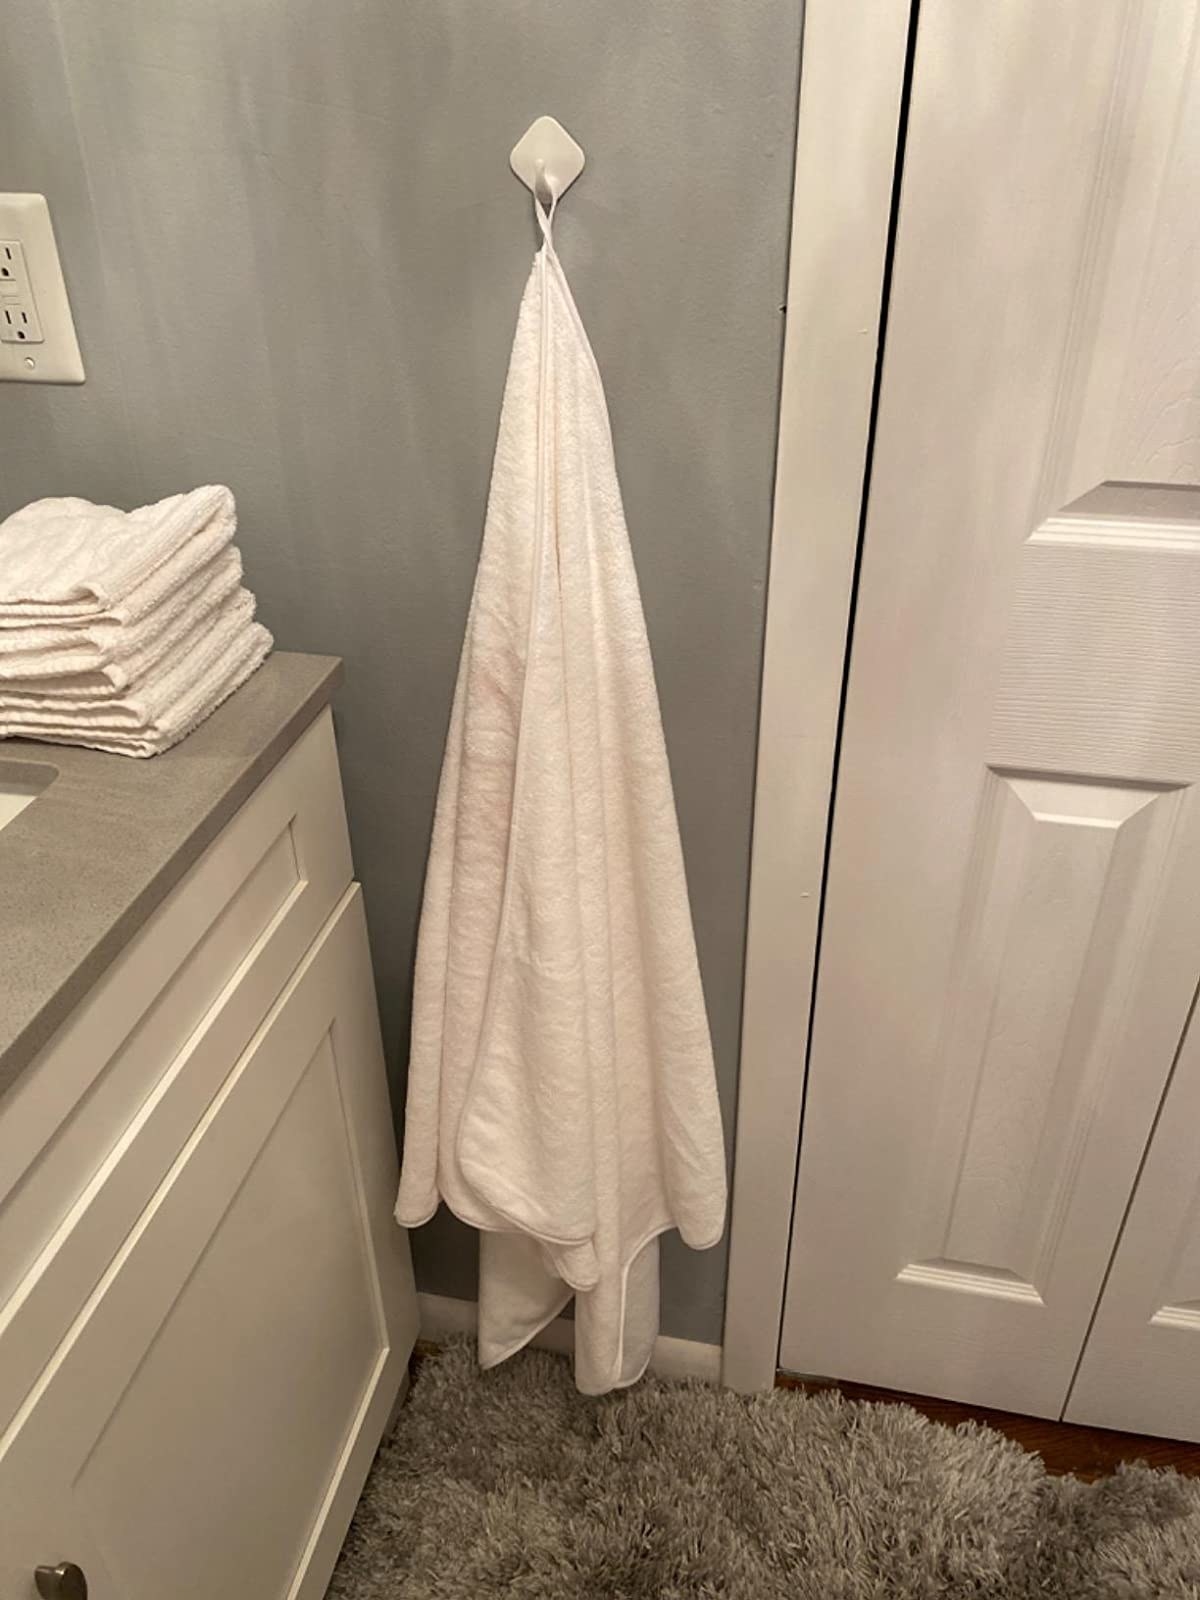 The white towel on a hook